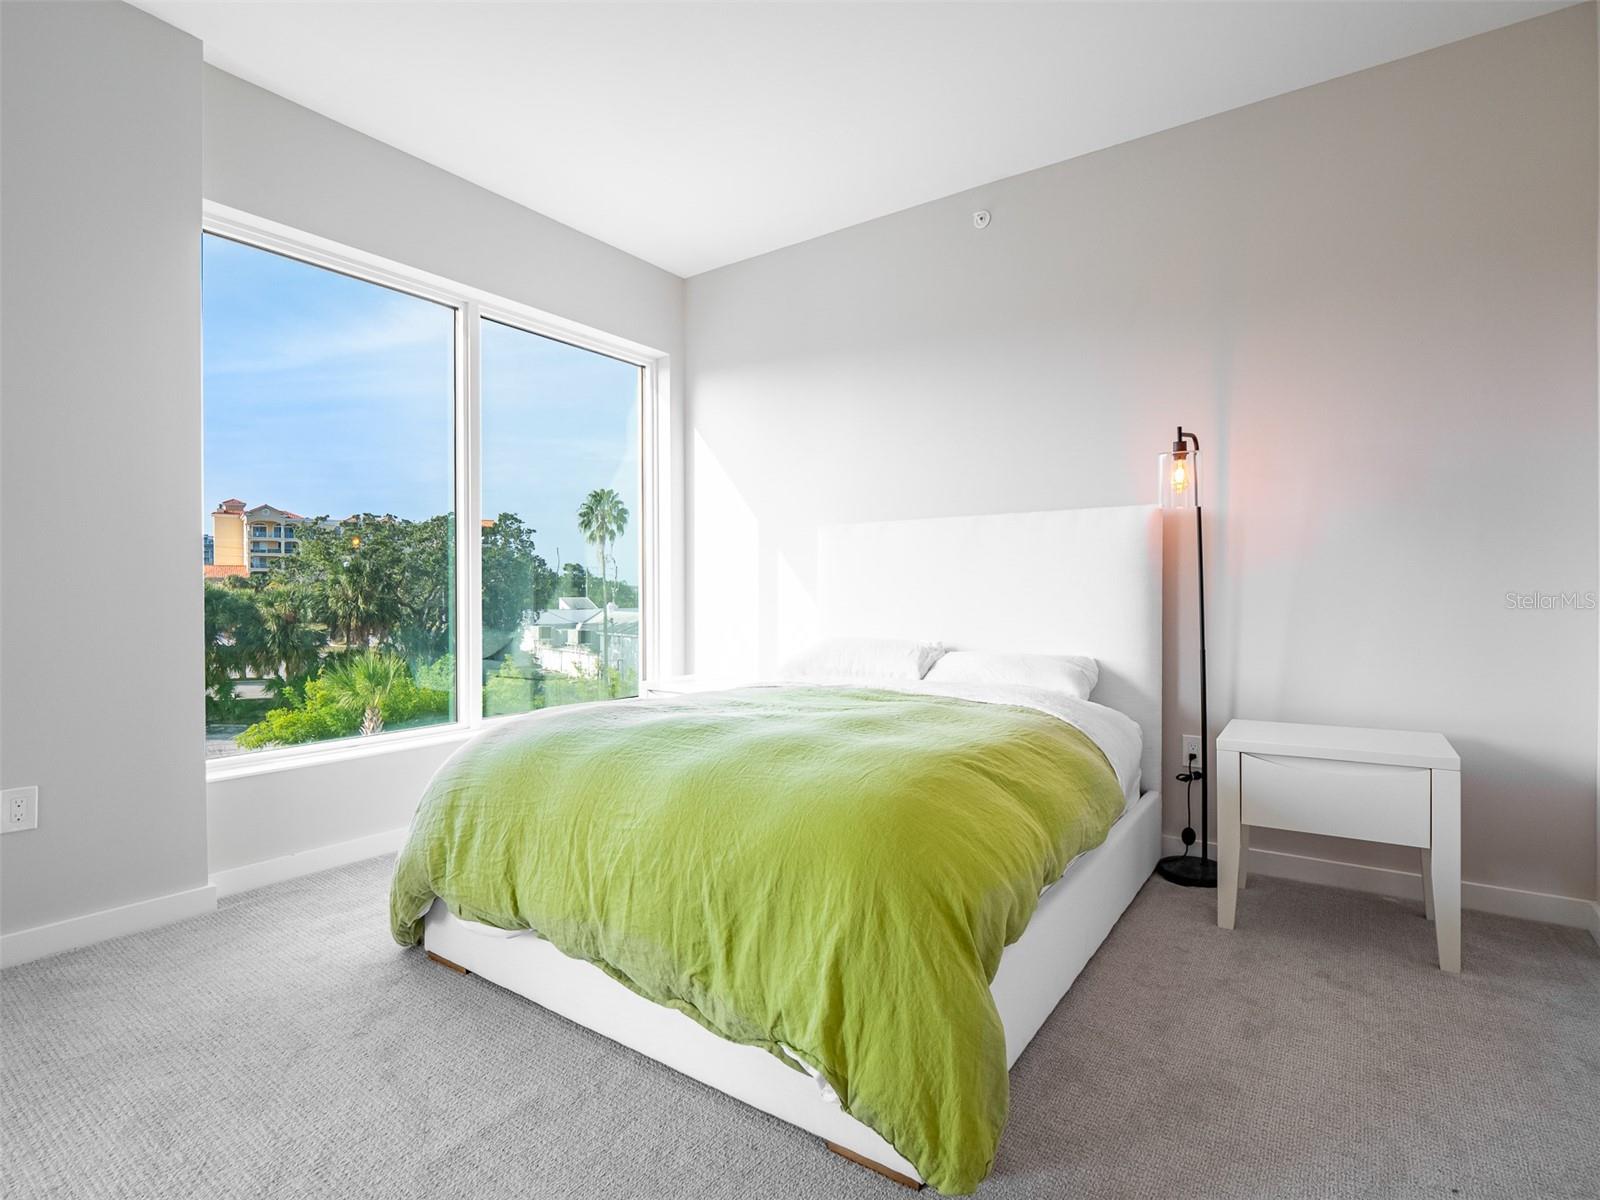 Third bedroom with South-East views and access to shared 2nd and 3rd bedroom balcony